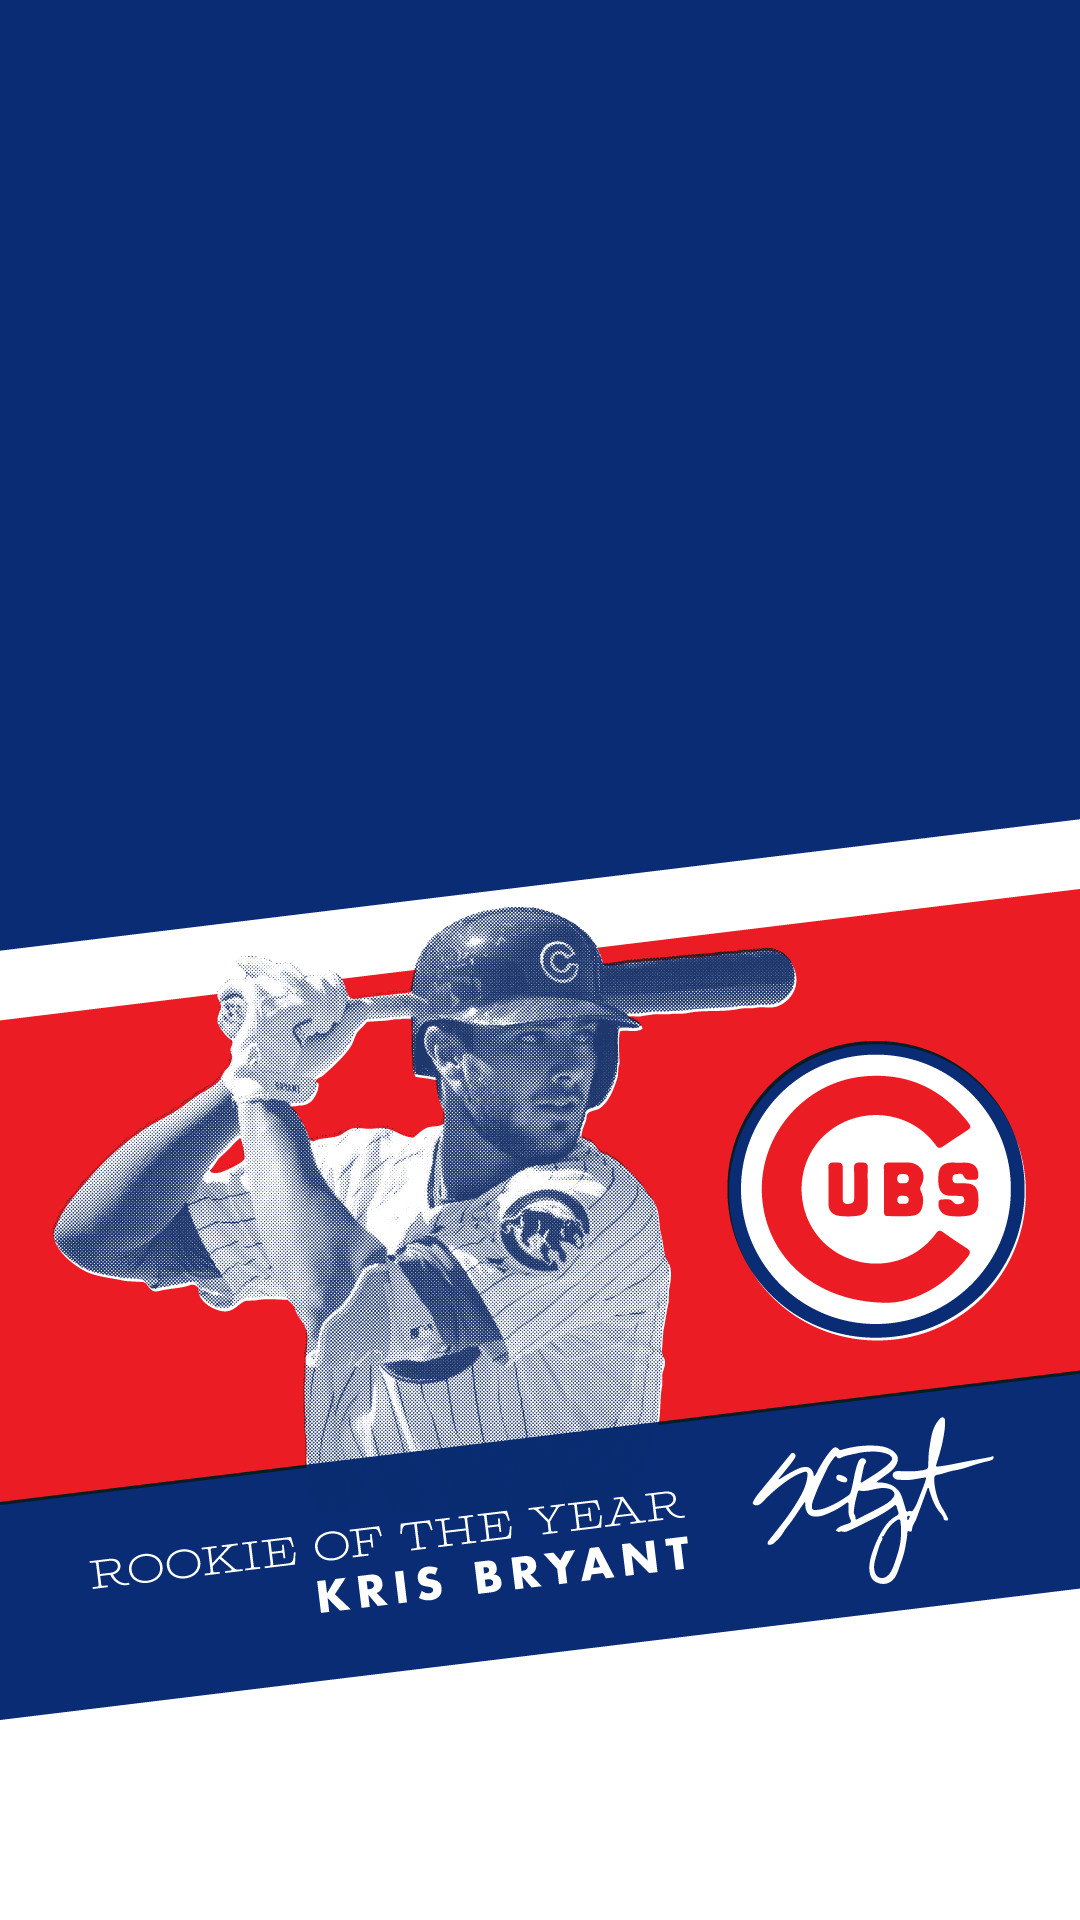 Kris Bryant Rookie of the Year